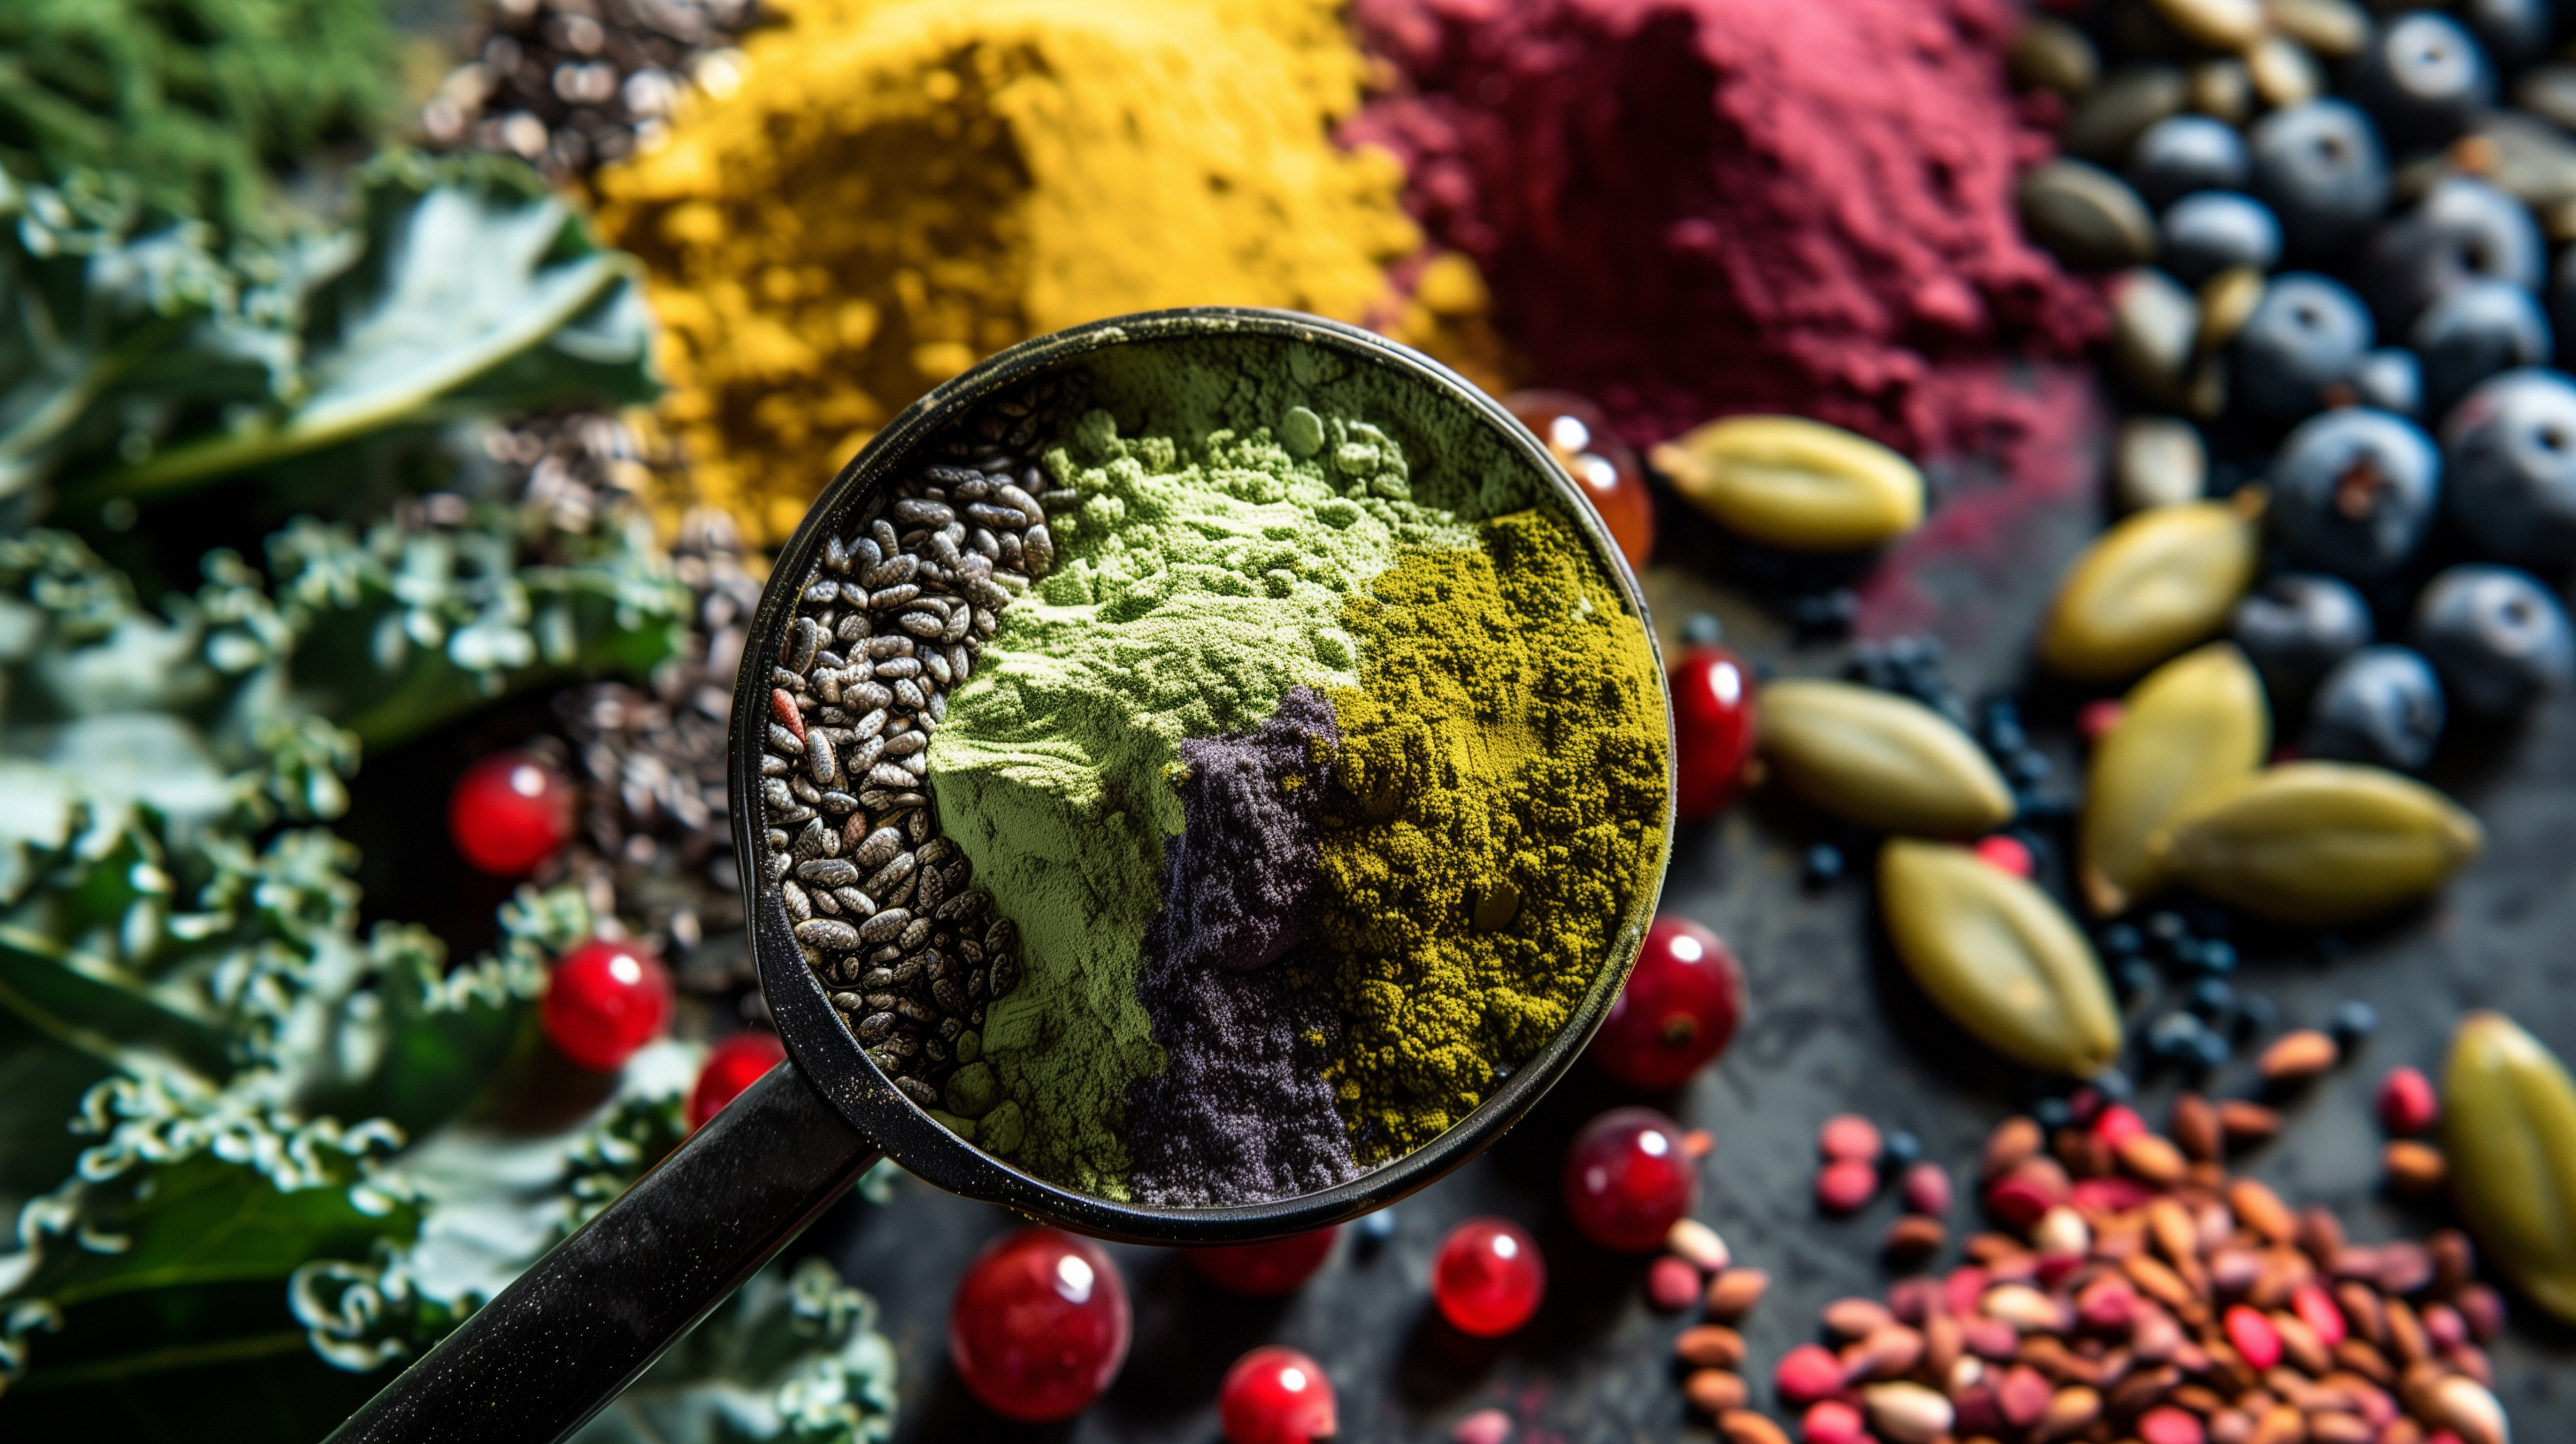 colorful superfood powder against a backdrop of wholesome ingredients like berries, seeds, and greens, with a magnifying glass